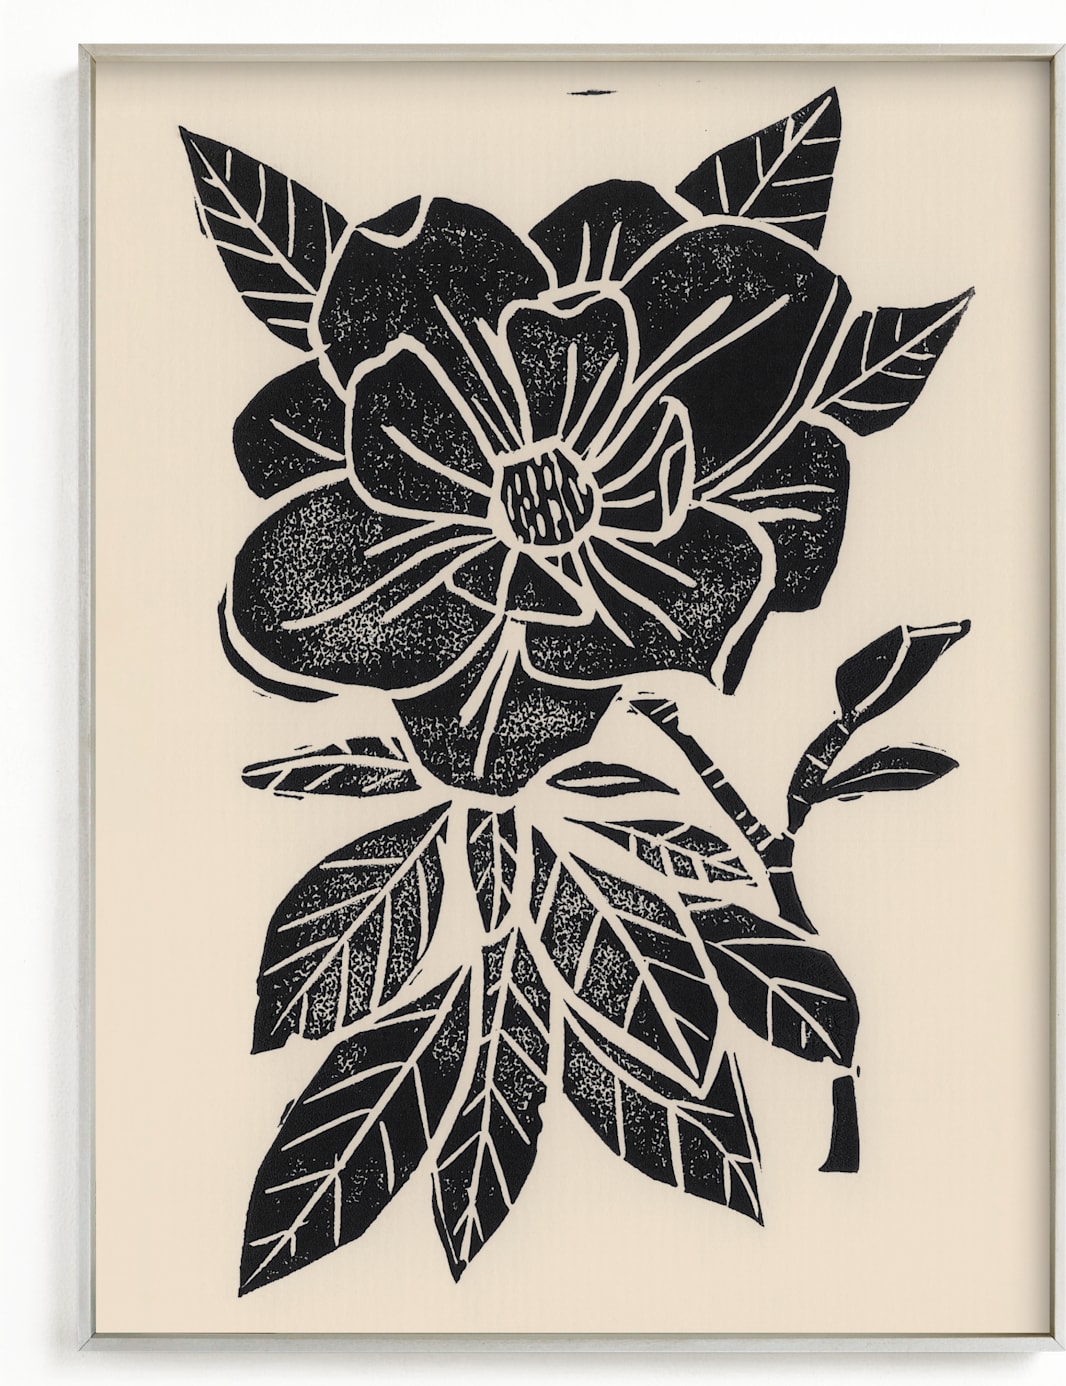 This is a black art by Sherley Ferreira called Magnolia.